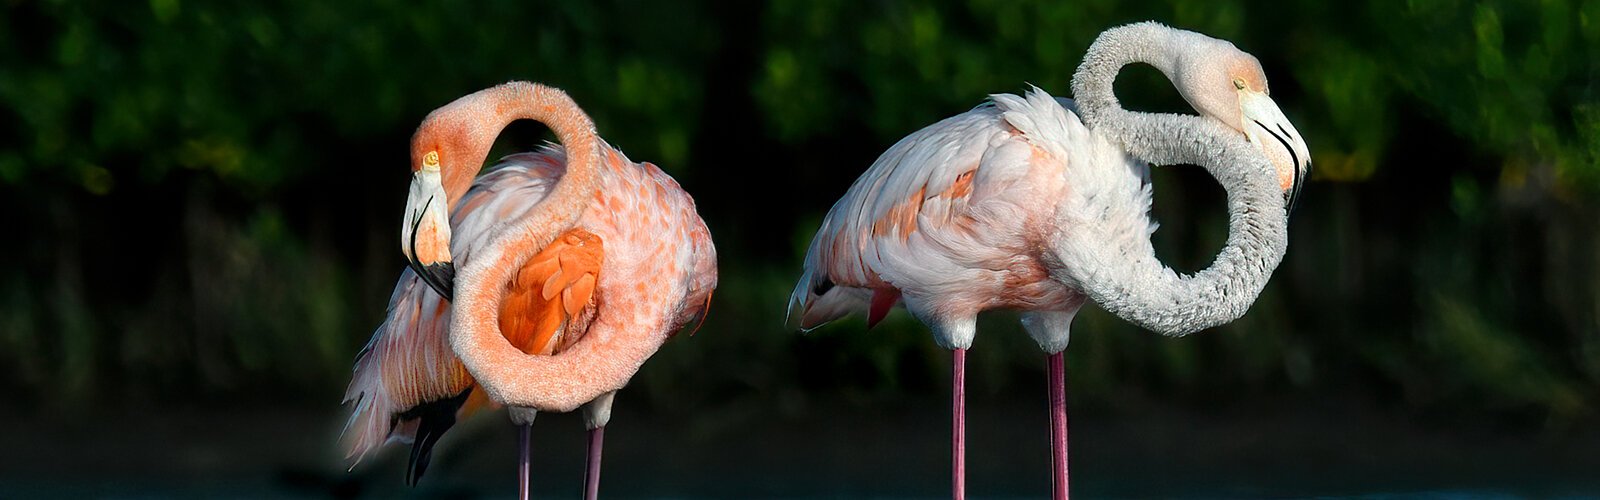 Before hundreds of flamingos were displaced from abroad by Hurricane Idalia, there were no wild flamingos on Florida shores except in the Everglades area.